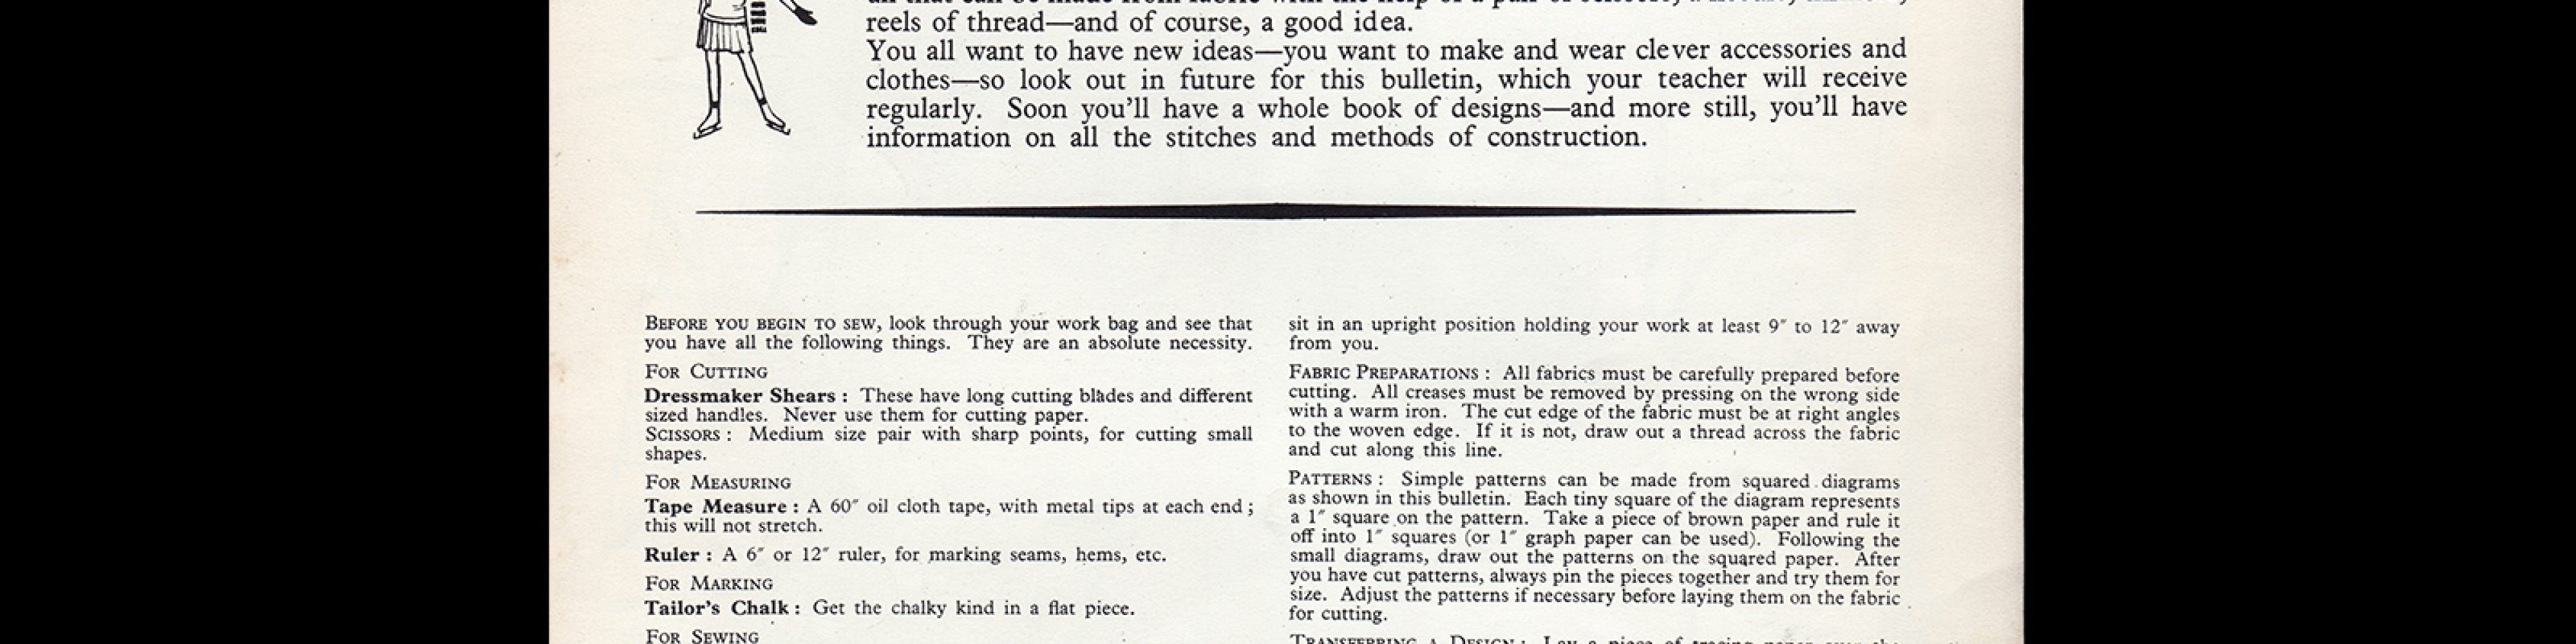 And So To Sew Bulletin 1a, 1950s